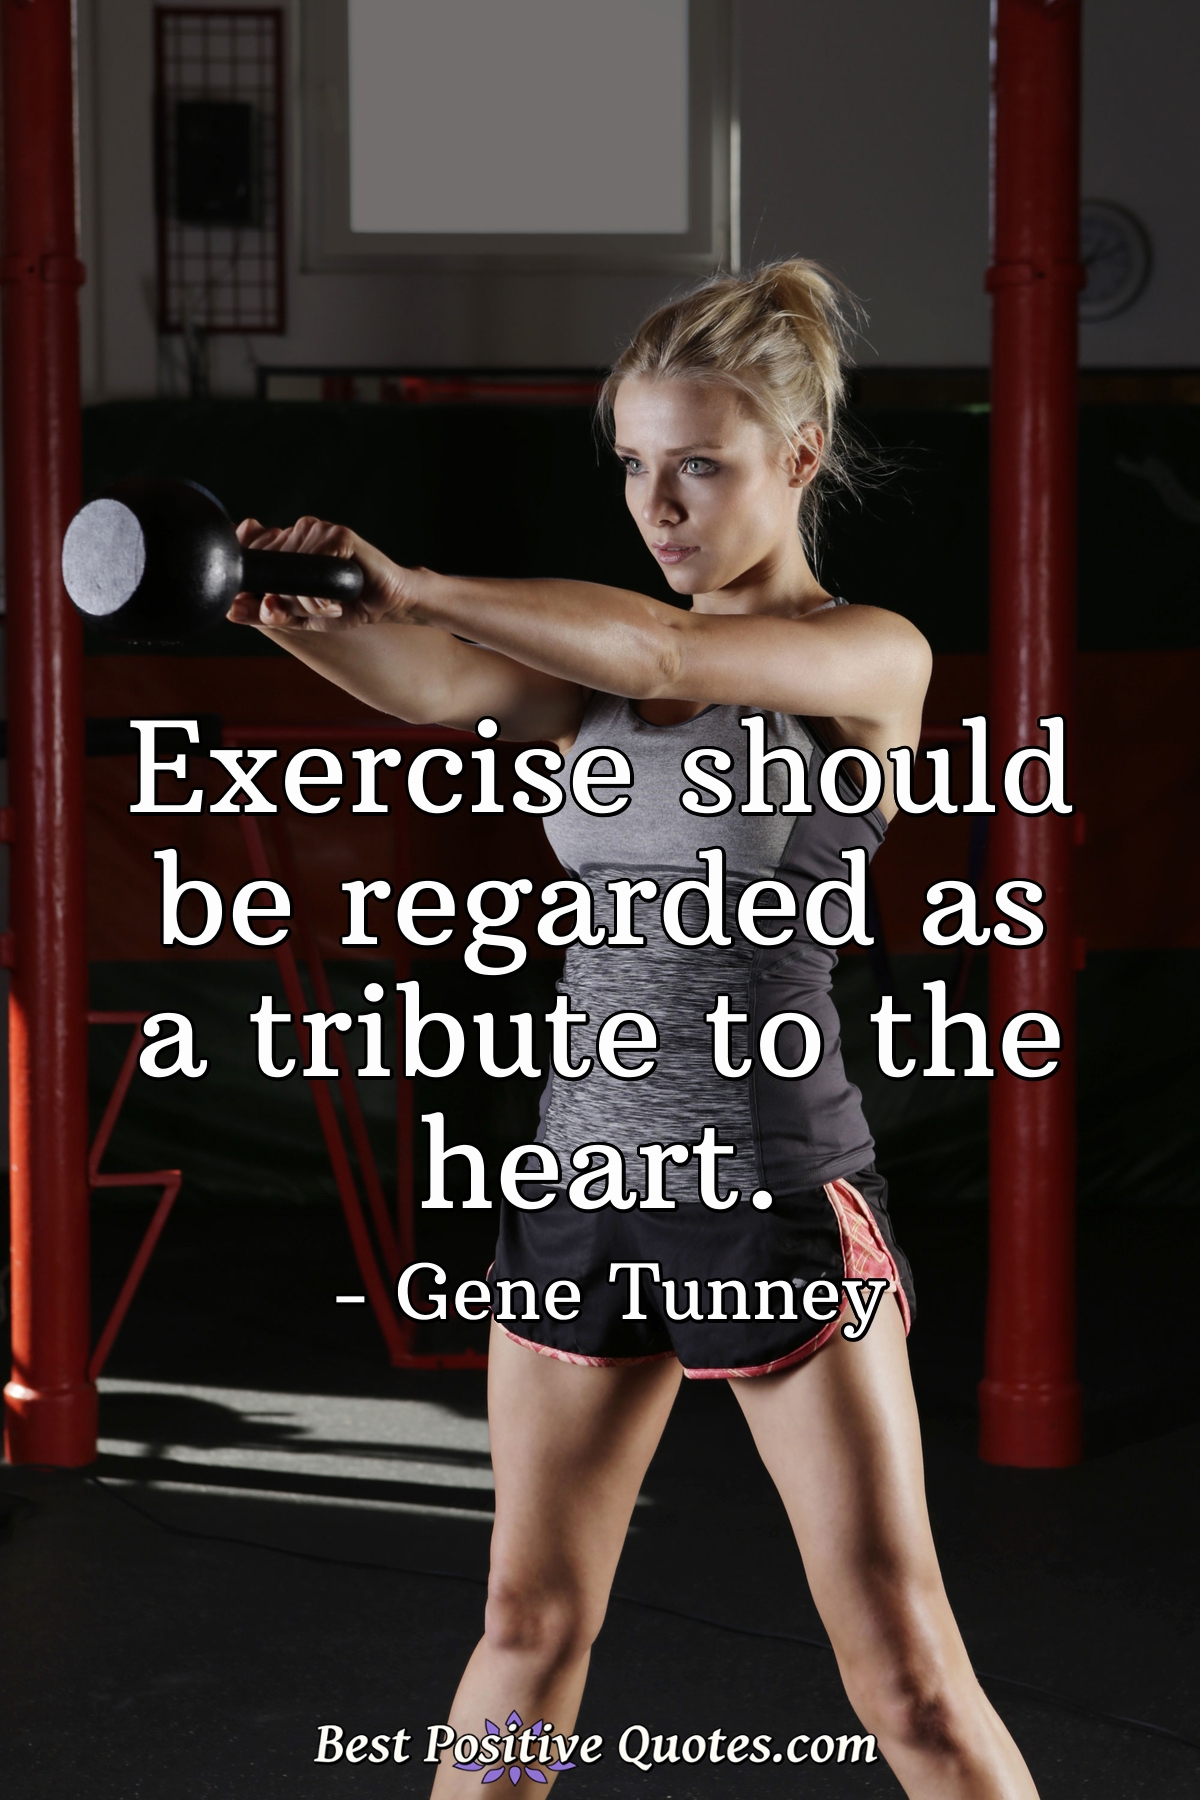 Exercise should be regarded as a tribute to the heart. - Gene Tunney